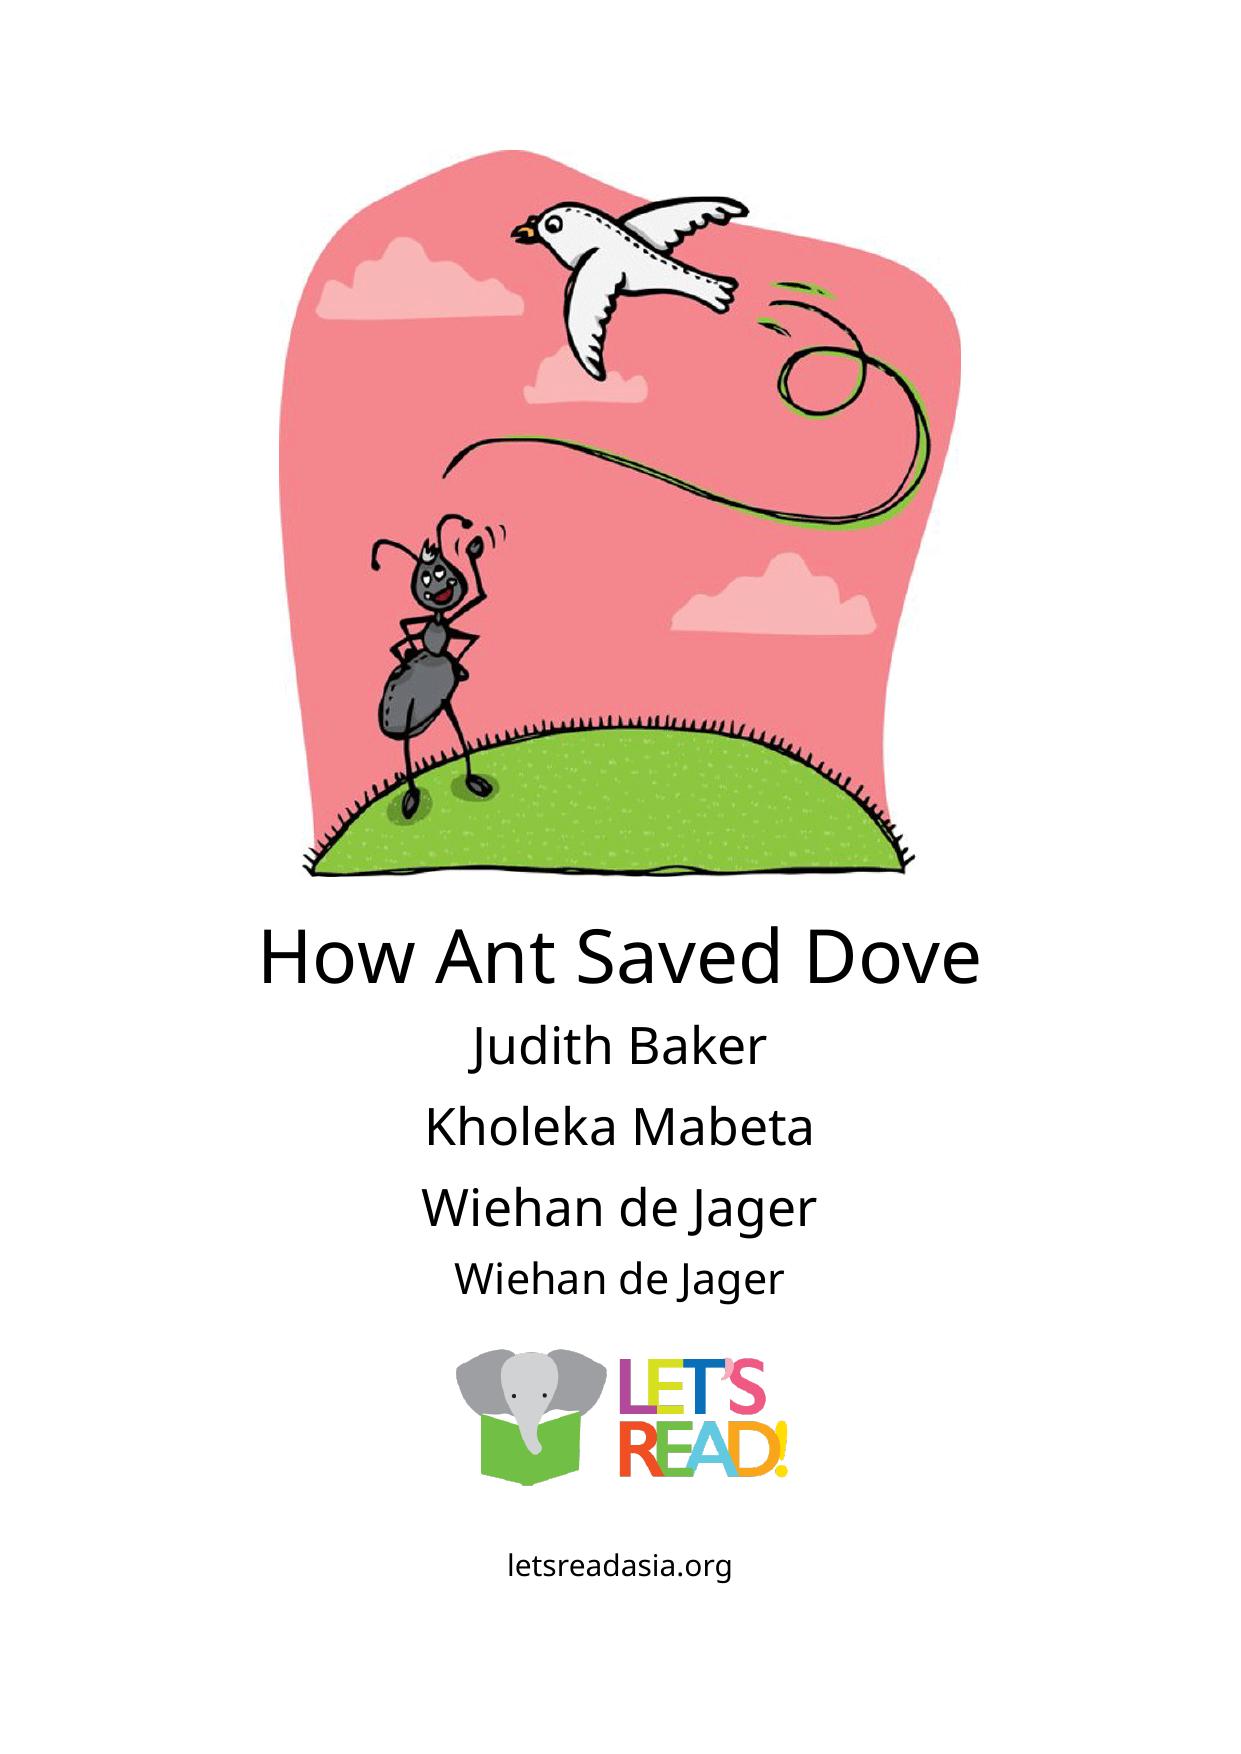 How Ant Saved Dove?